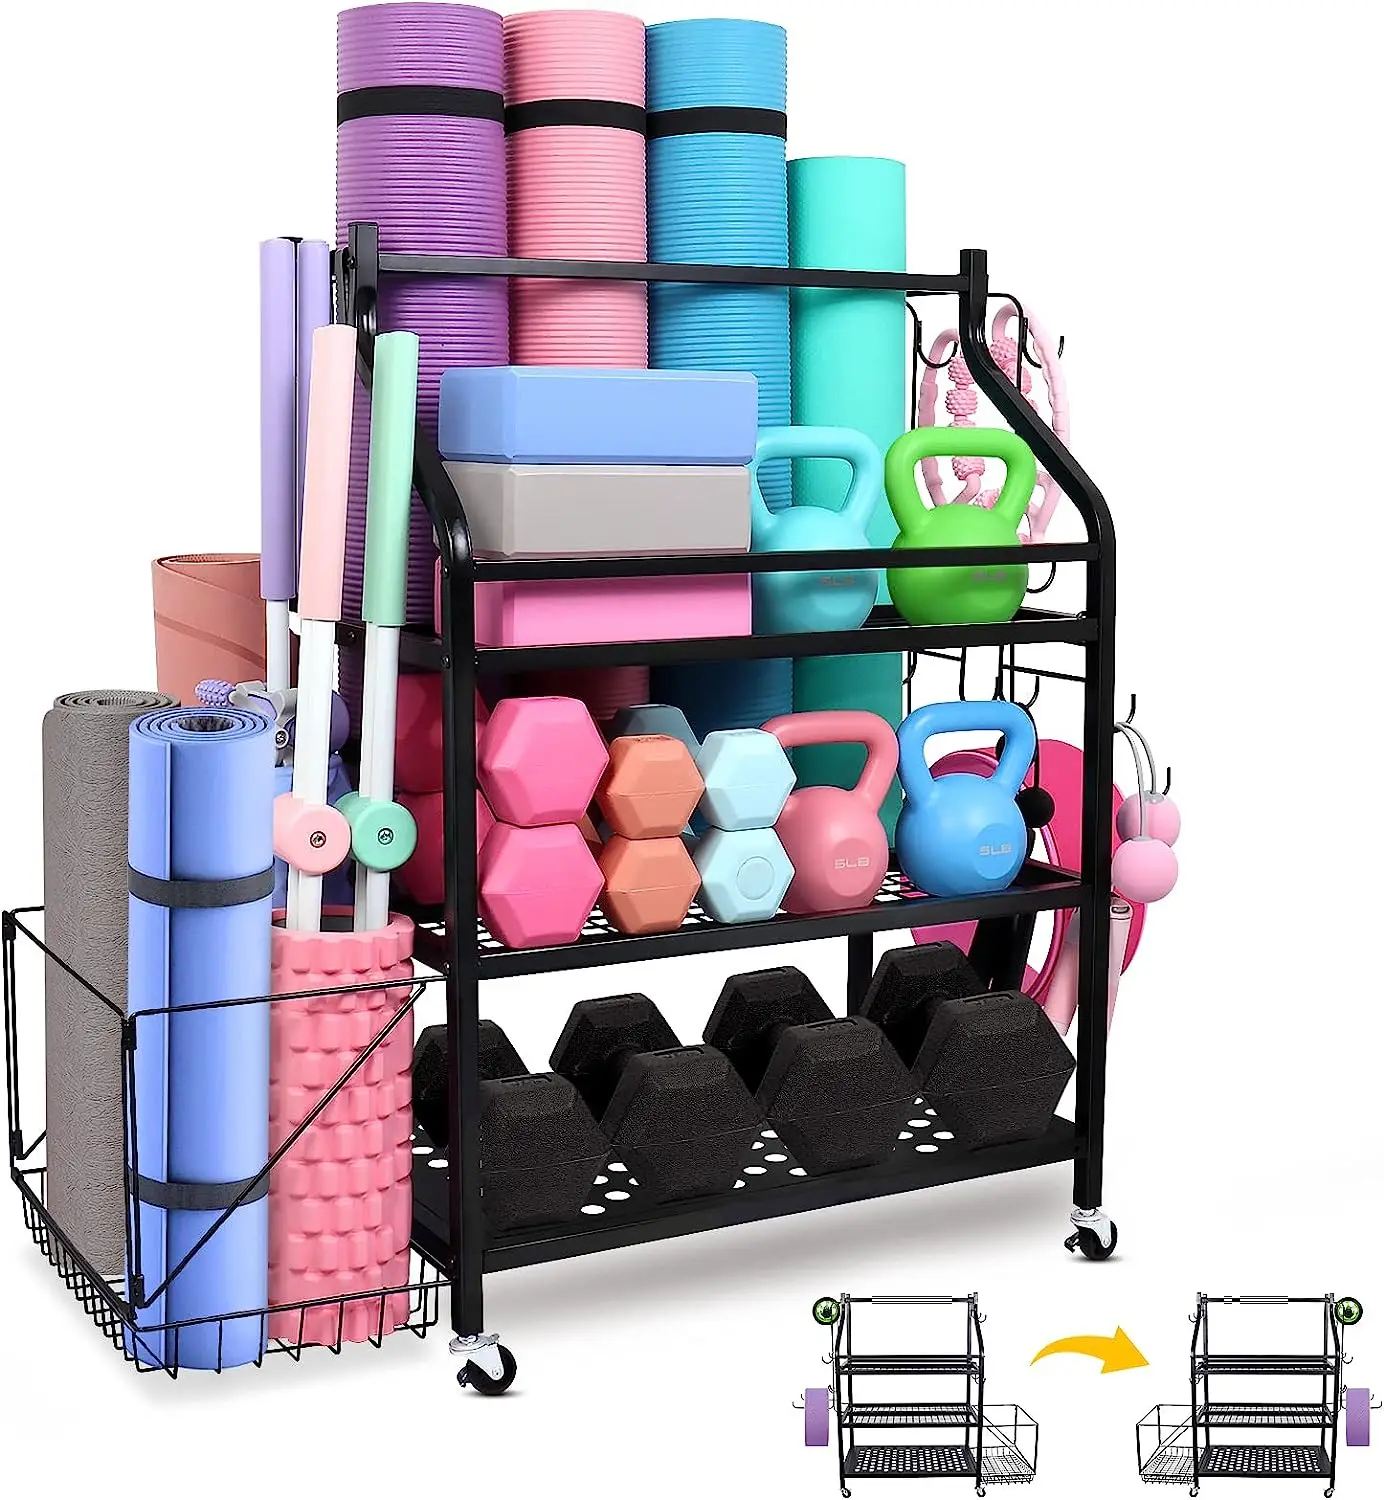 

Gym Storage - Heavy Duty Yoga Mat Storage , Weight Stand for Dumbbells On Wheels with Extra Side Storage Space & Hooks,Util Poo